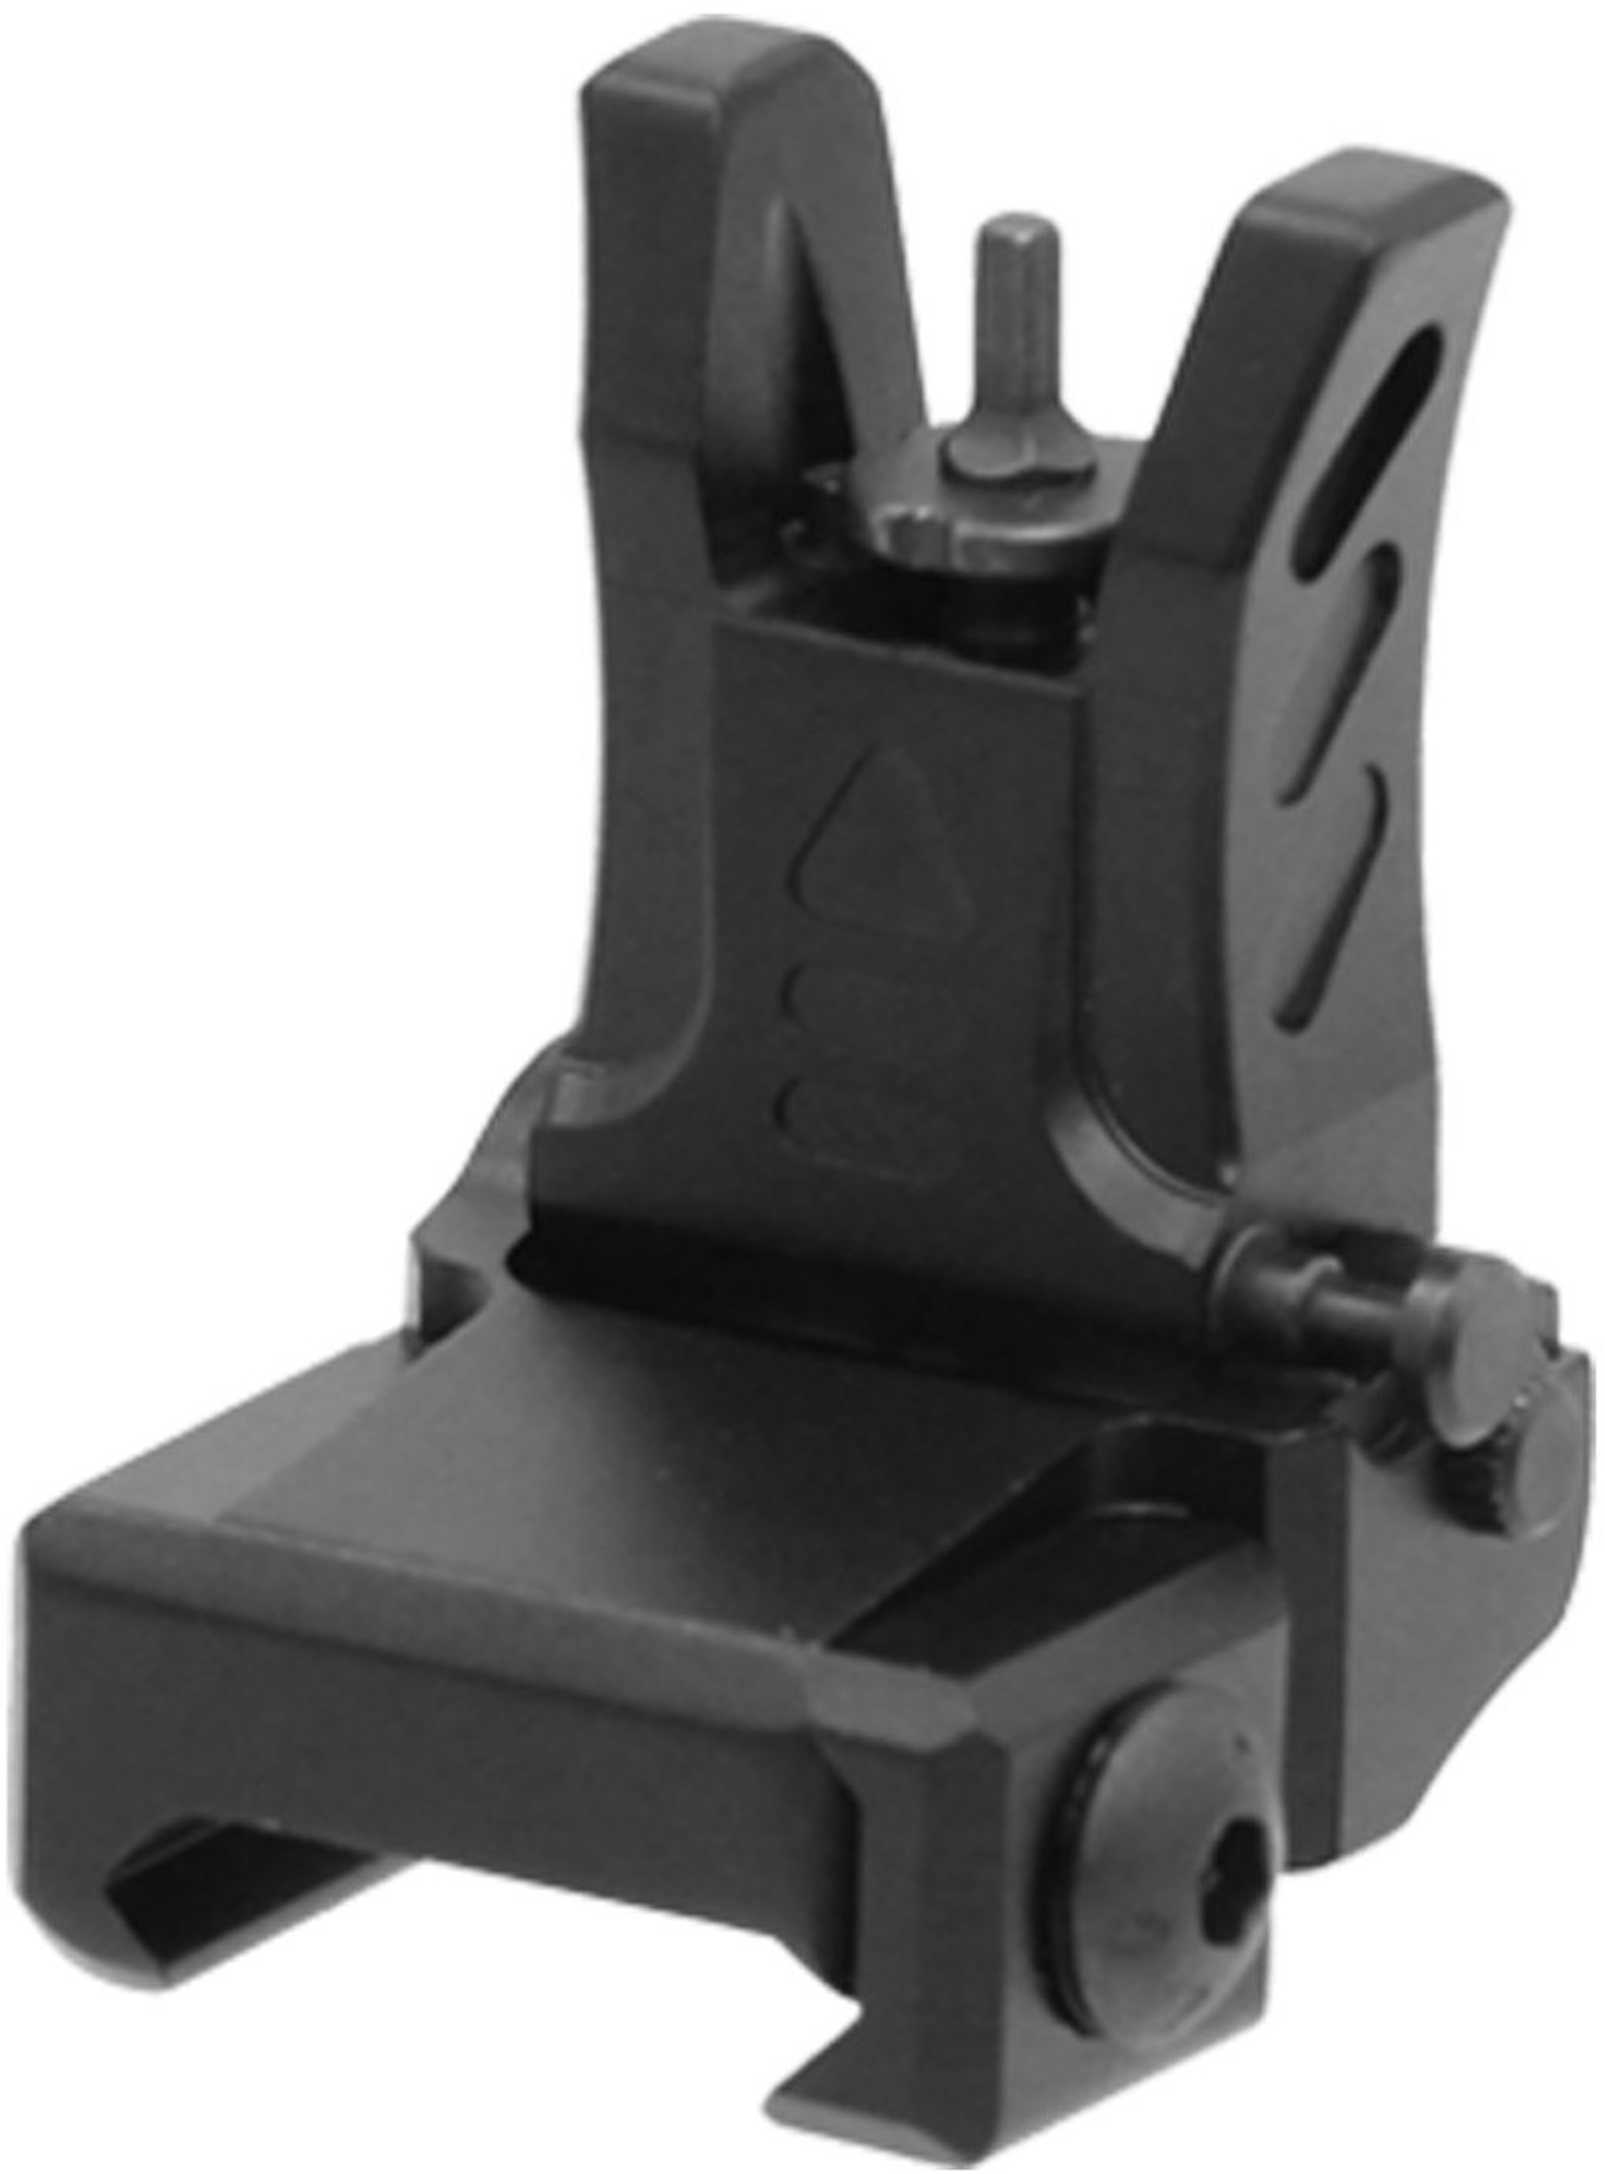 Leapers UTG AR15 LowProfile Flip-up FrontSight for Handguard